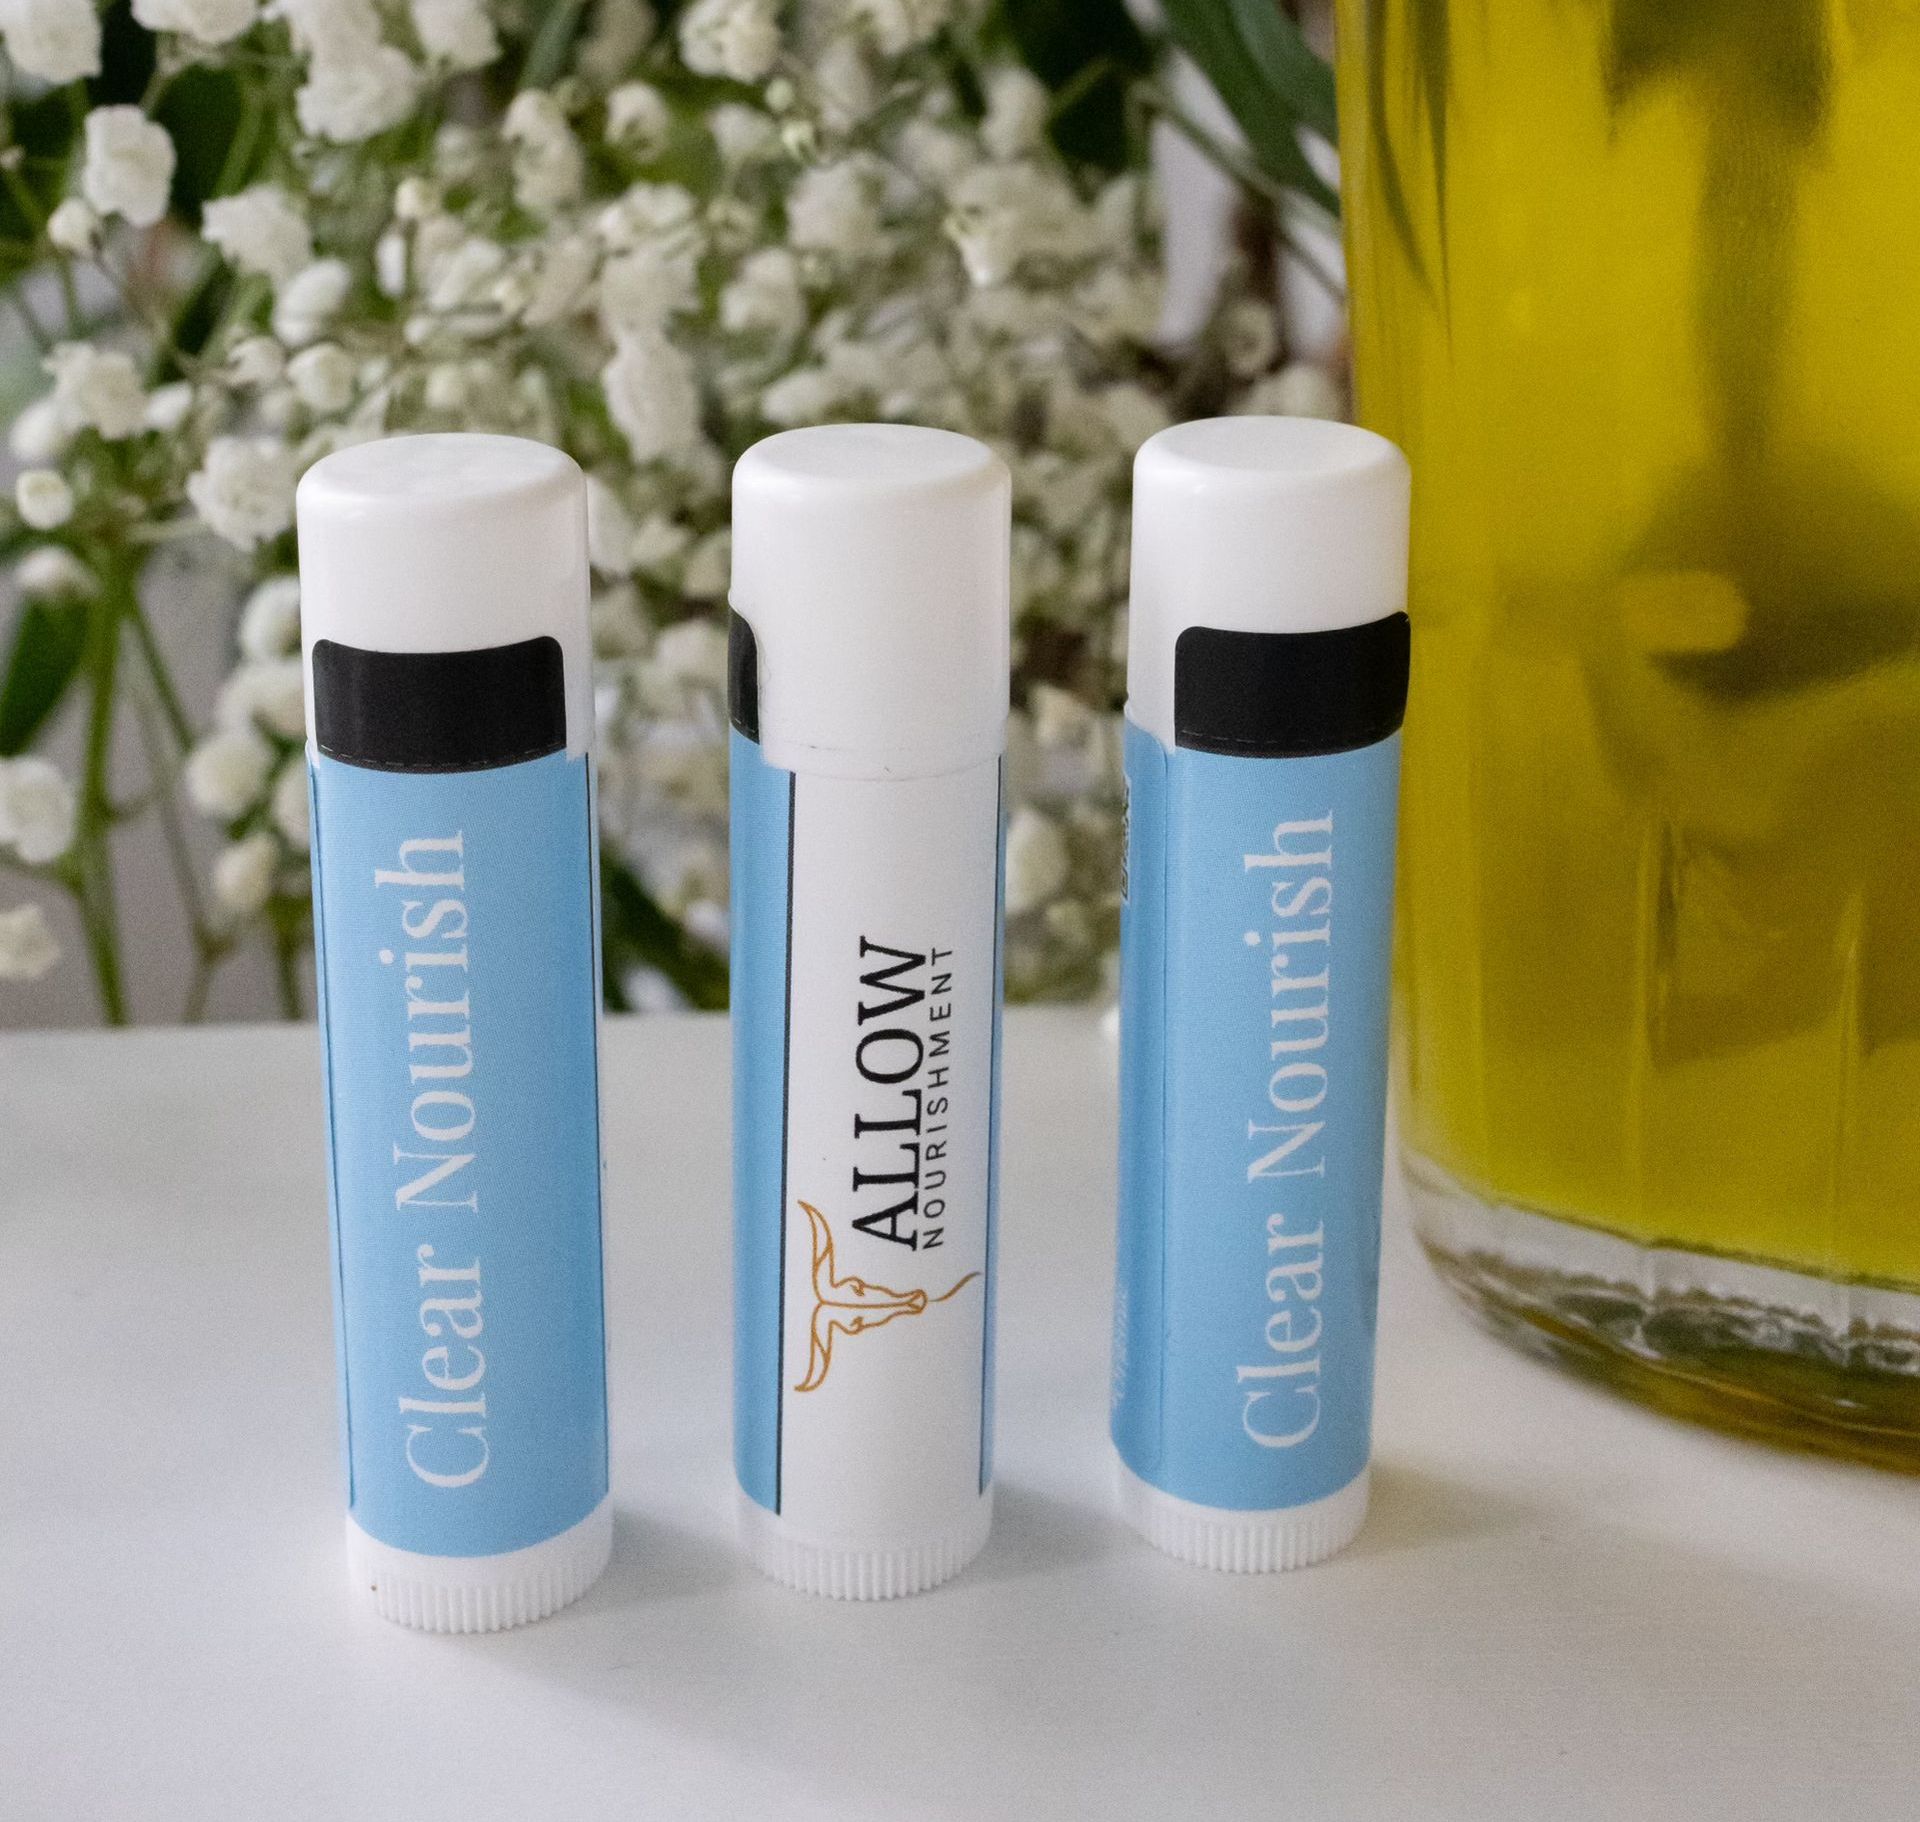 three lip balms are sitting on a table next to a bottle of oil .